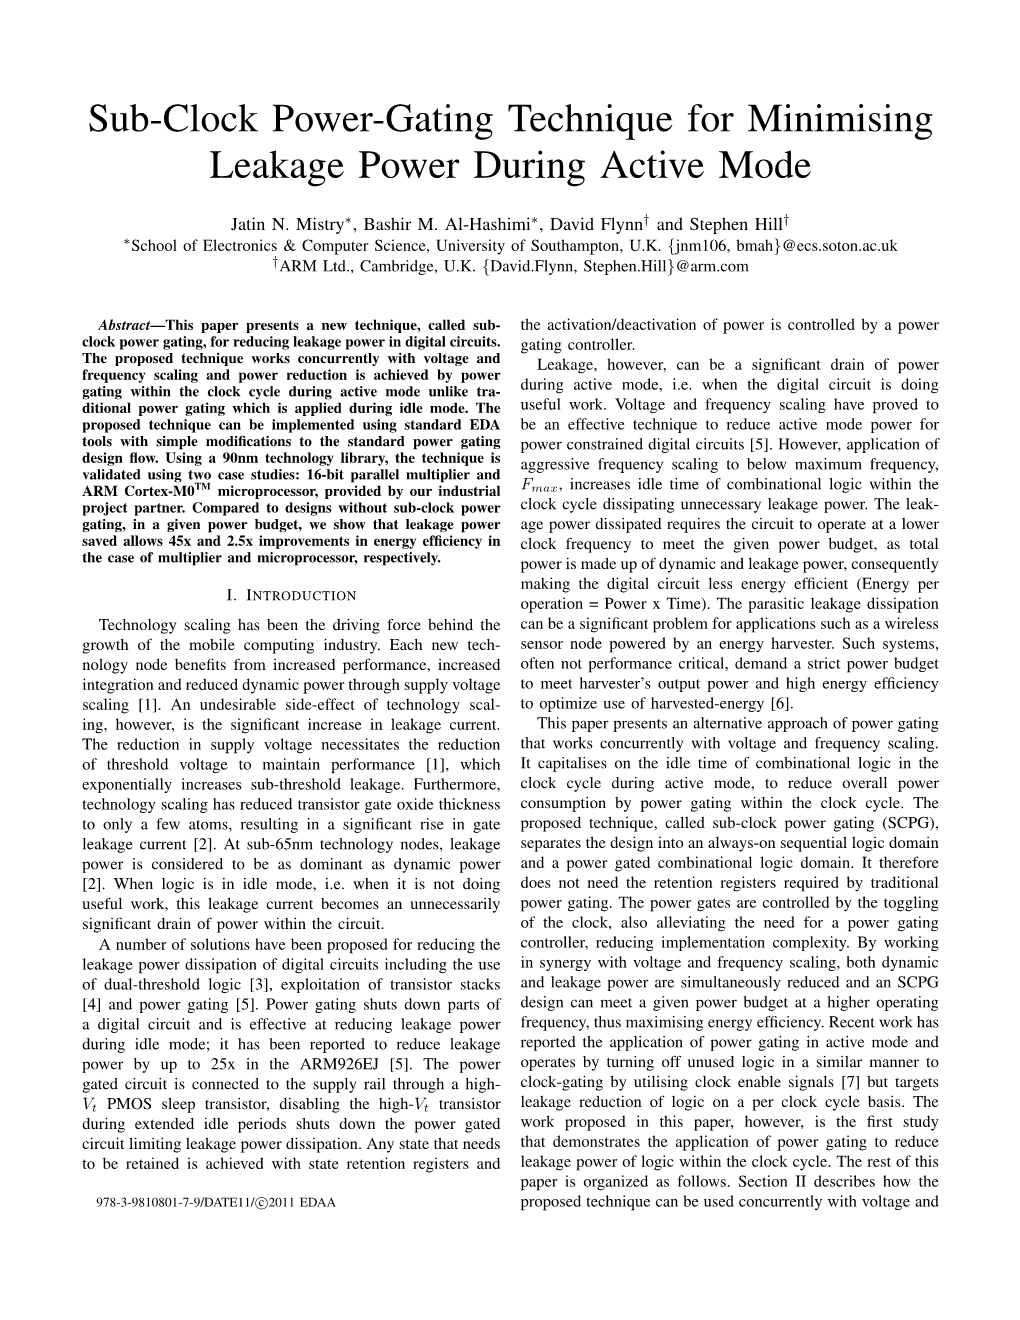 Sub-Clock Power-Gating Technique for Minimising Leakage Power During Active Mode